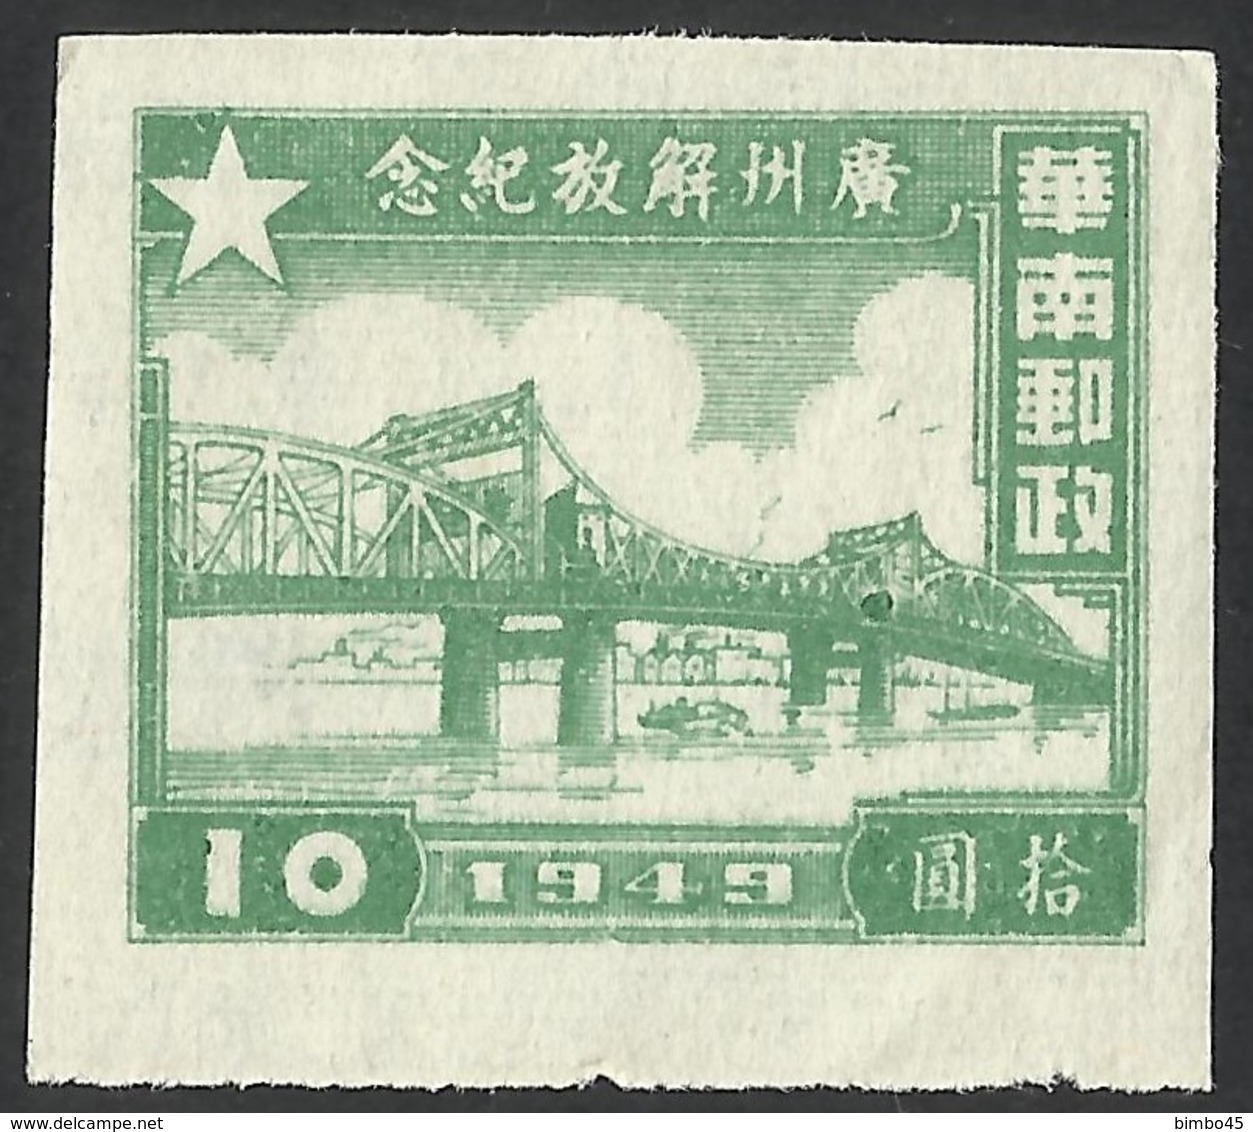 ERRORS--Southern CHINA 1949 Pearl River Bridge,Canton $10-- Large Green Spots  On The Mark.--MNG-Mint No Gum. - Cina Del Sud1949-50